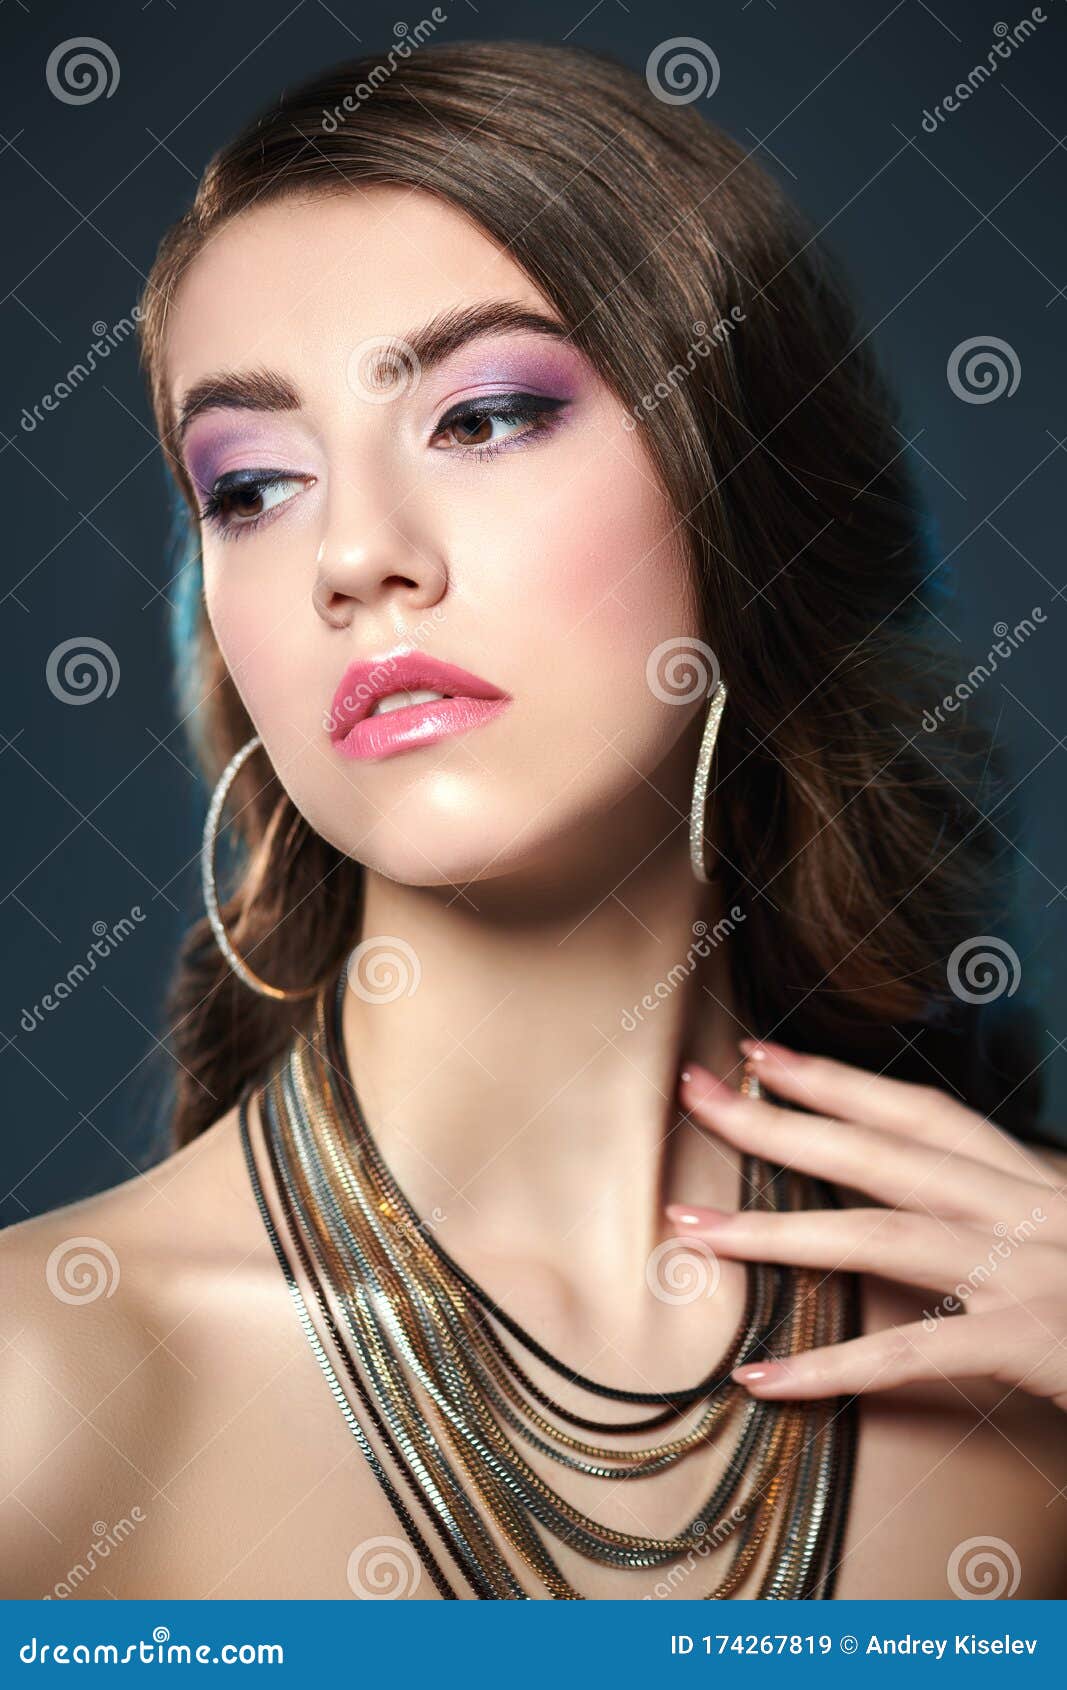 Jewelry salon ad stock image. Image of gorgeous, chain - 174267819